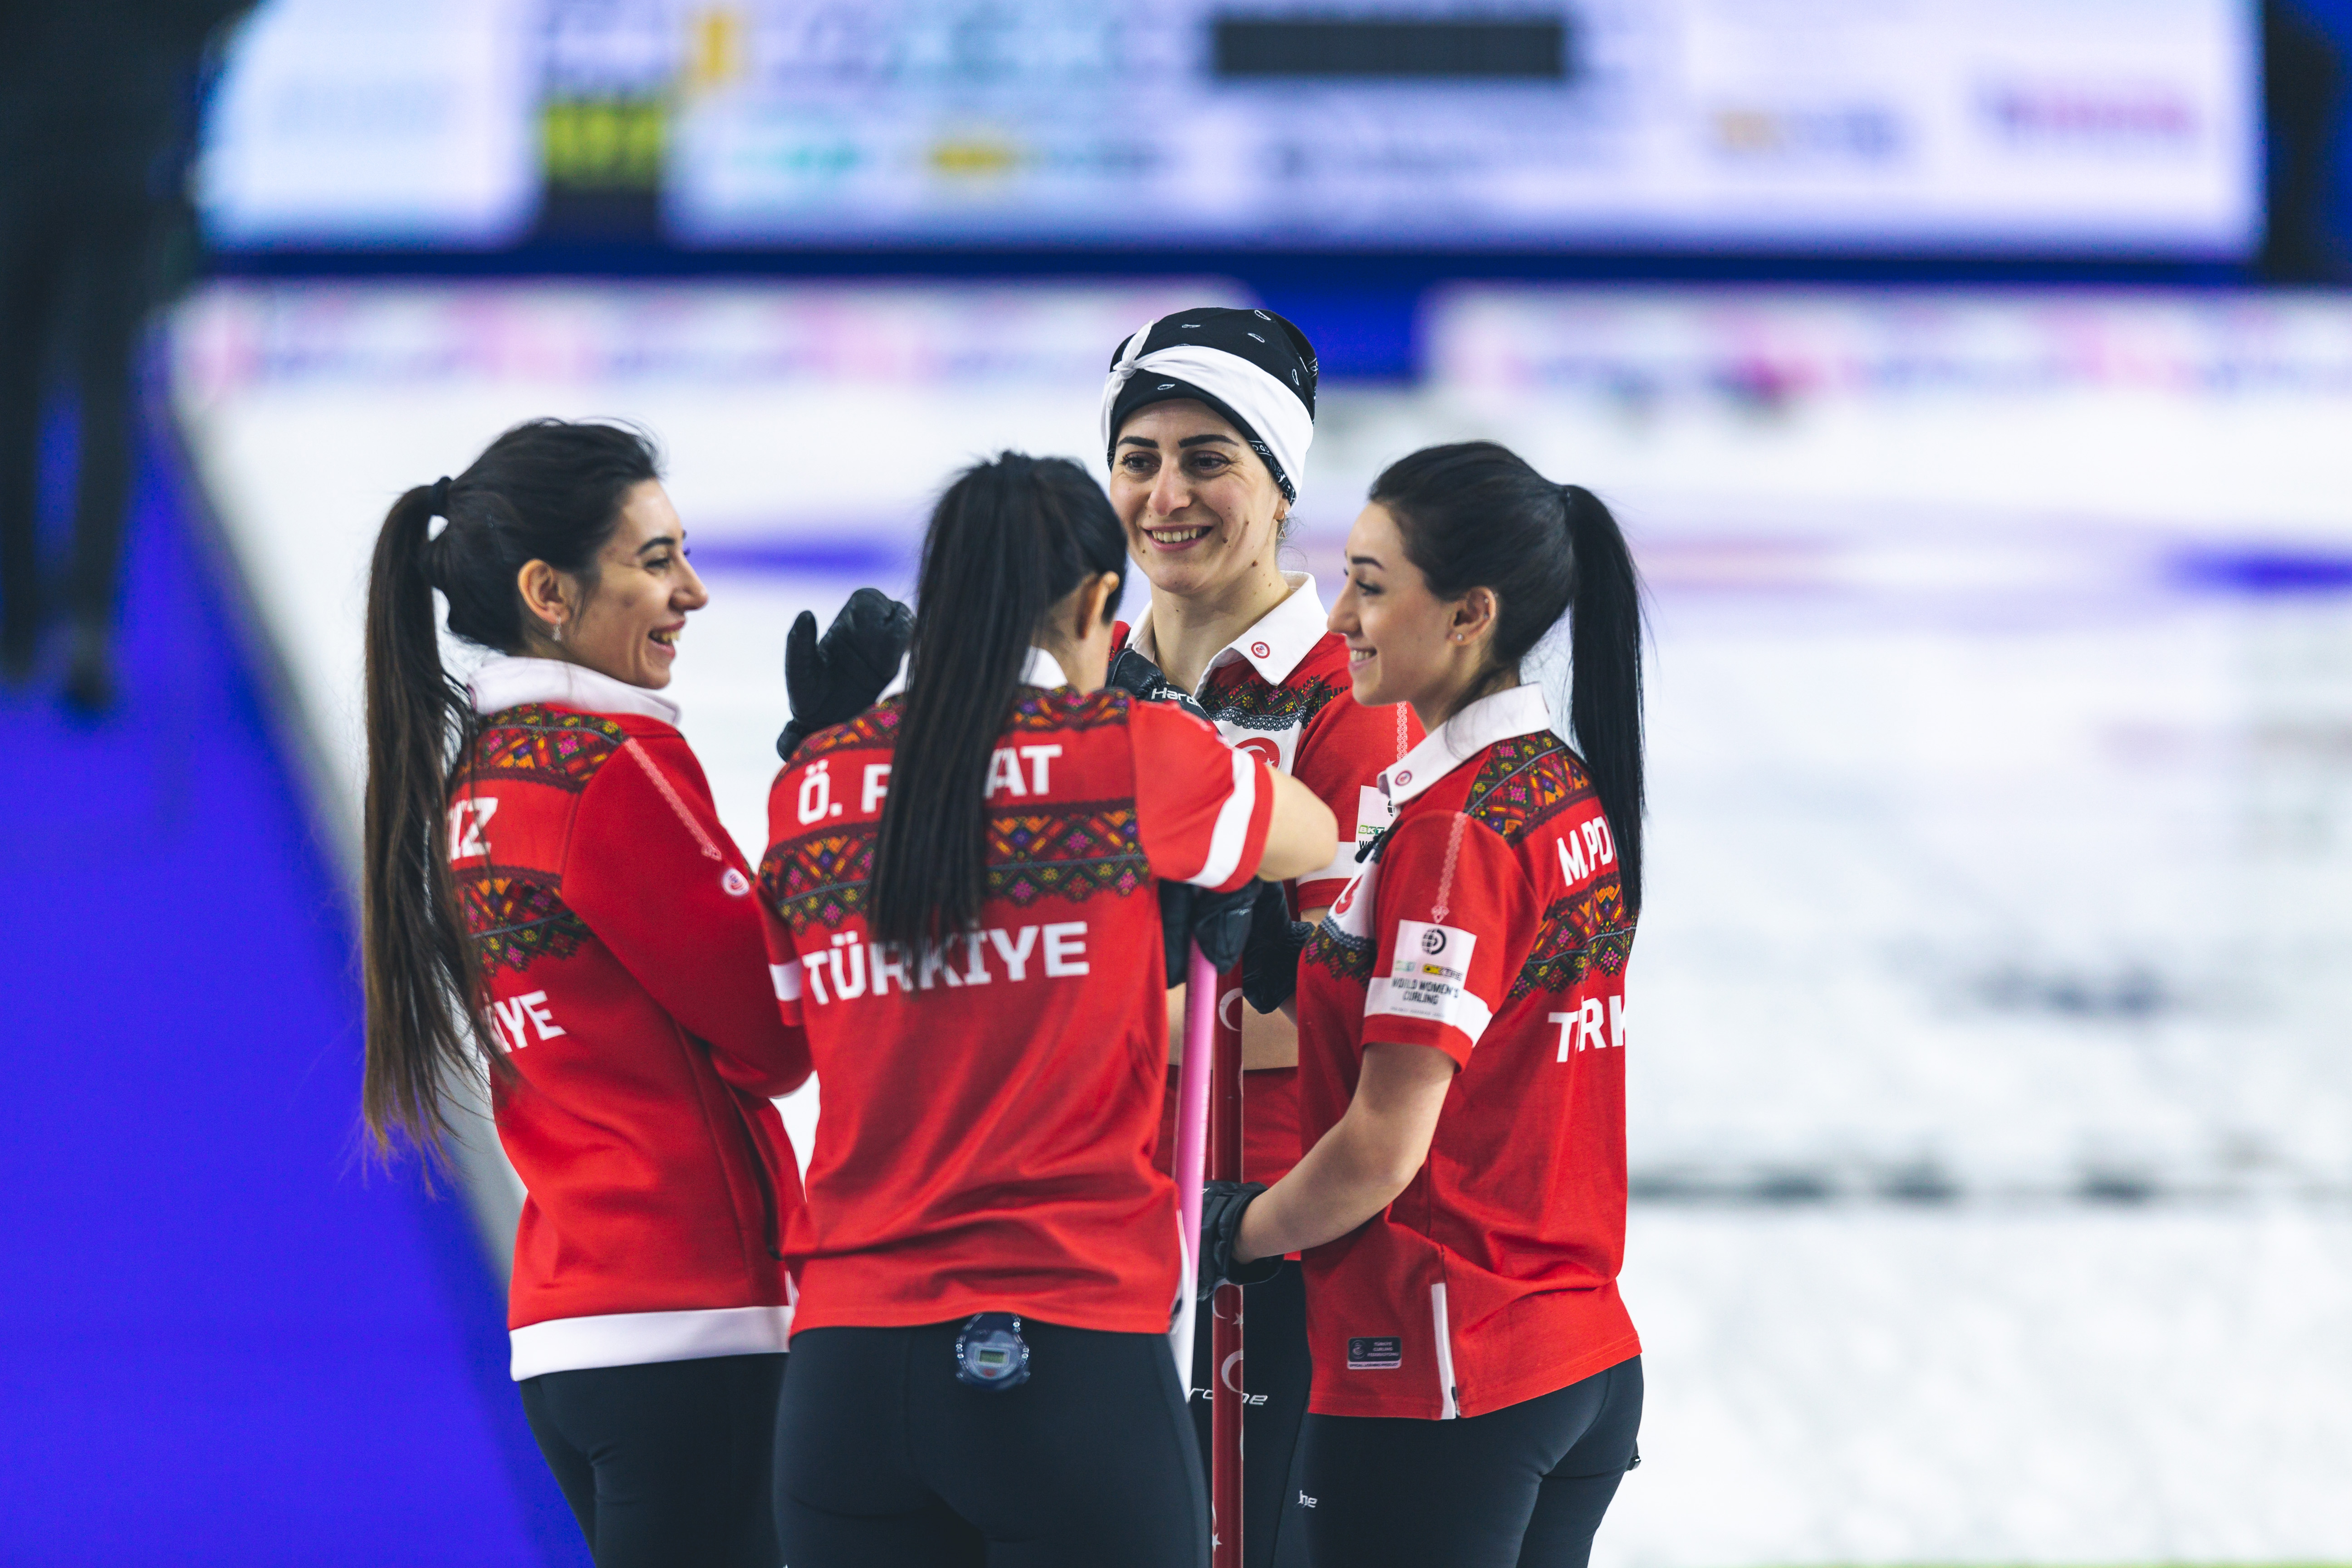 Turkey is a new player on the world women's curling scene. The